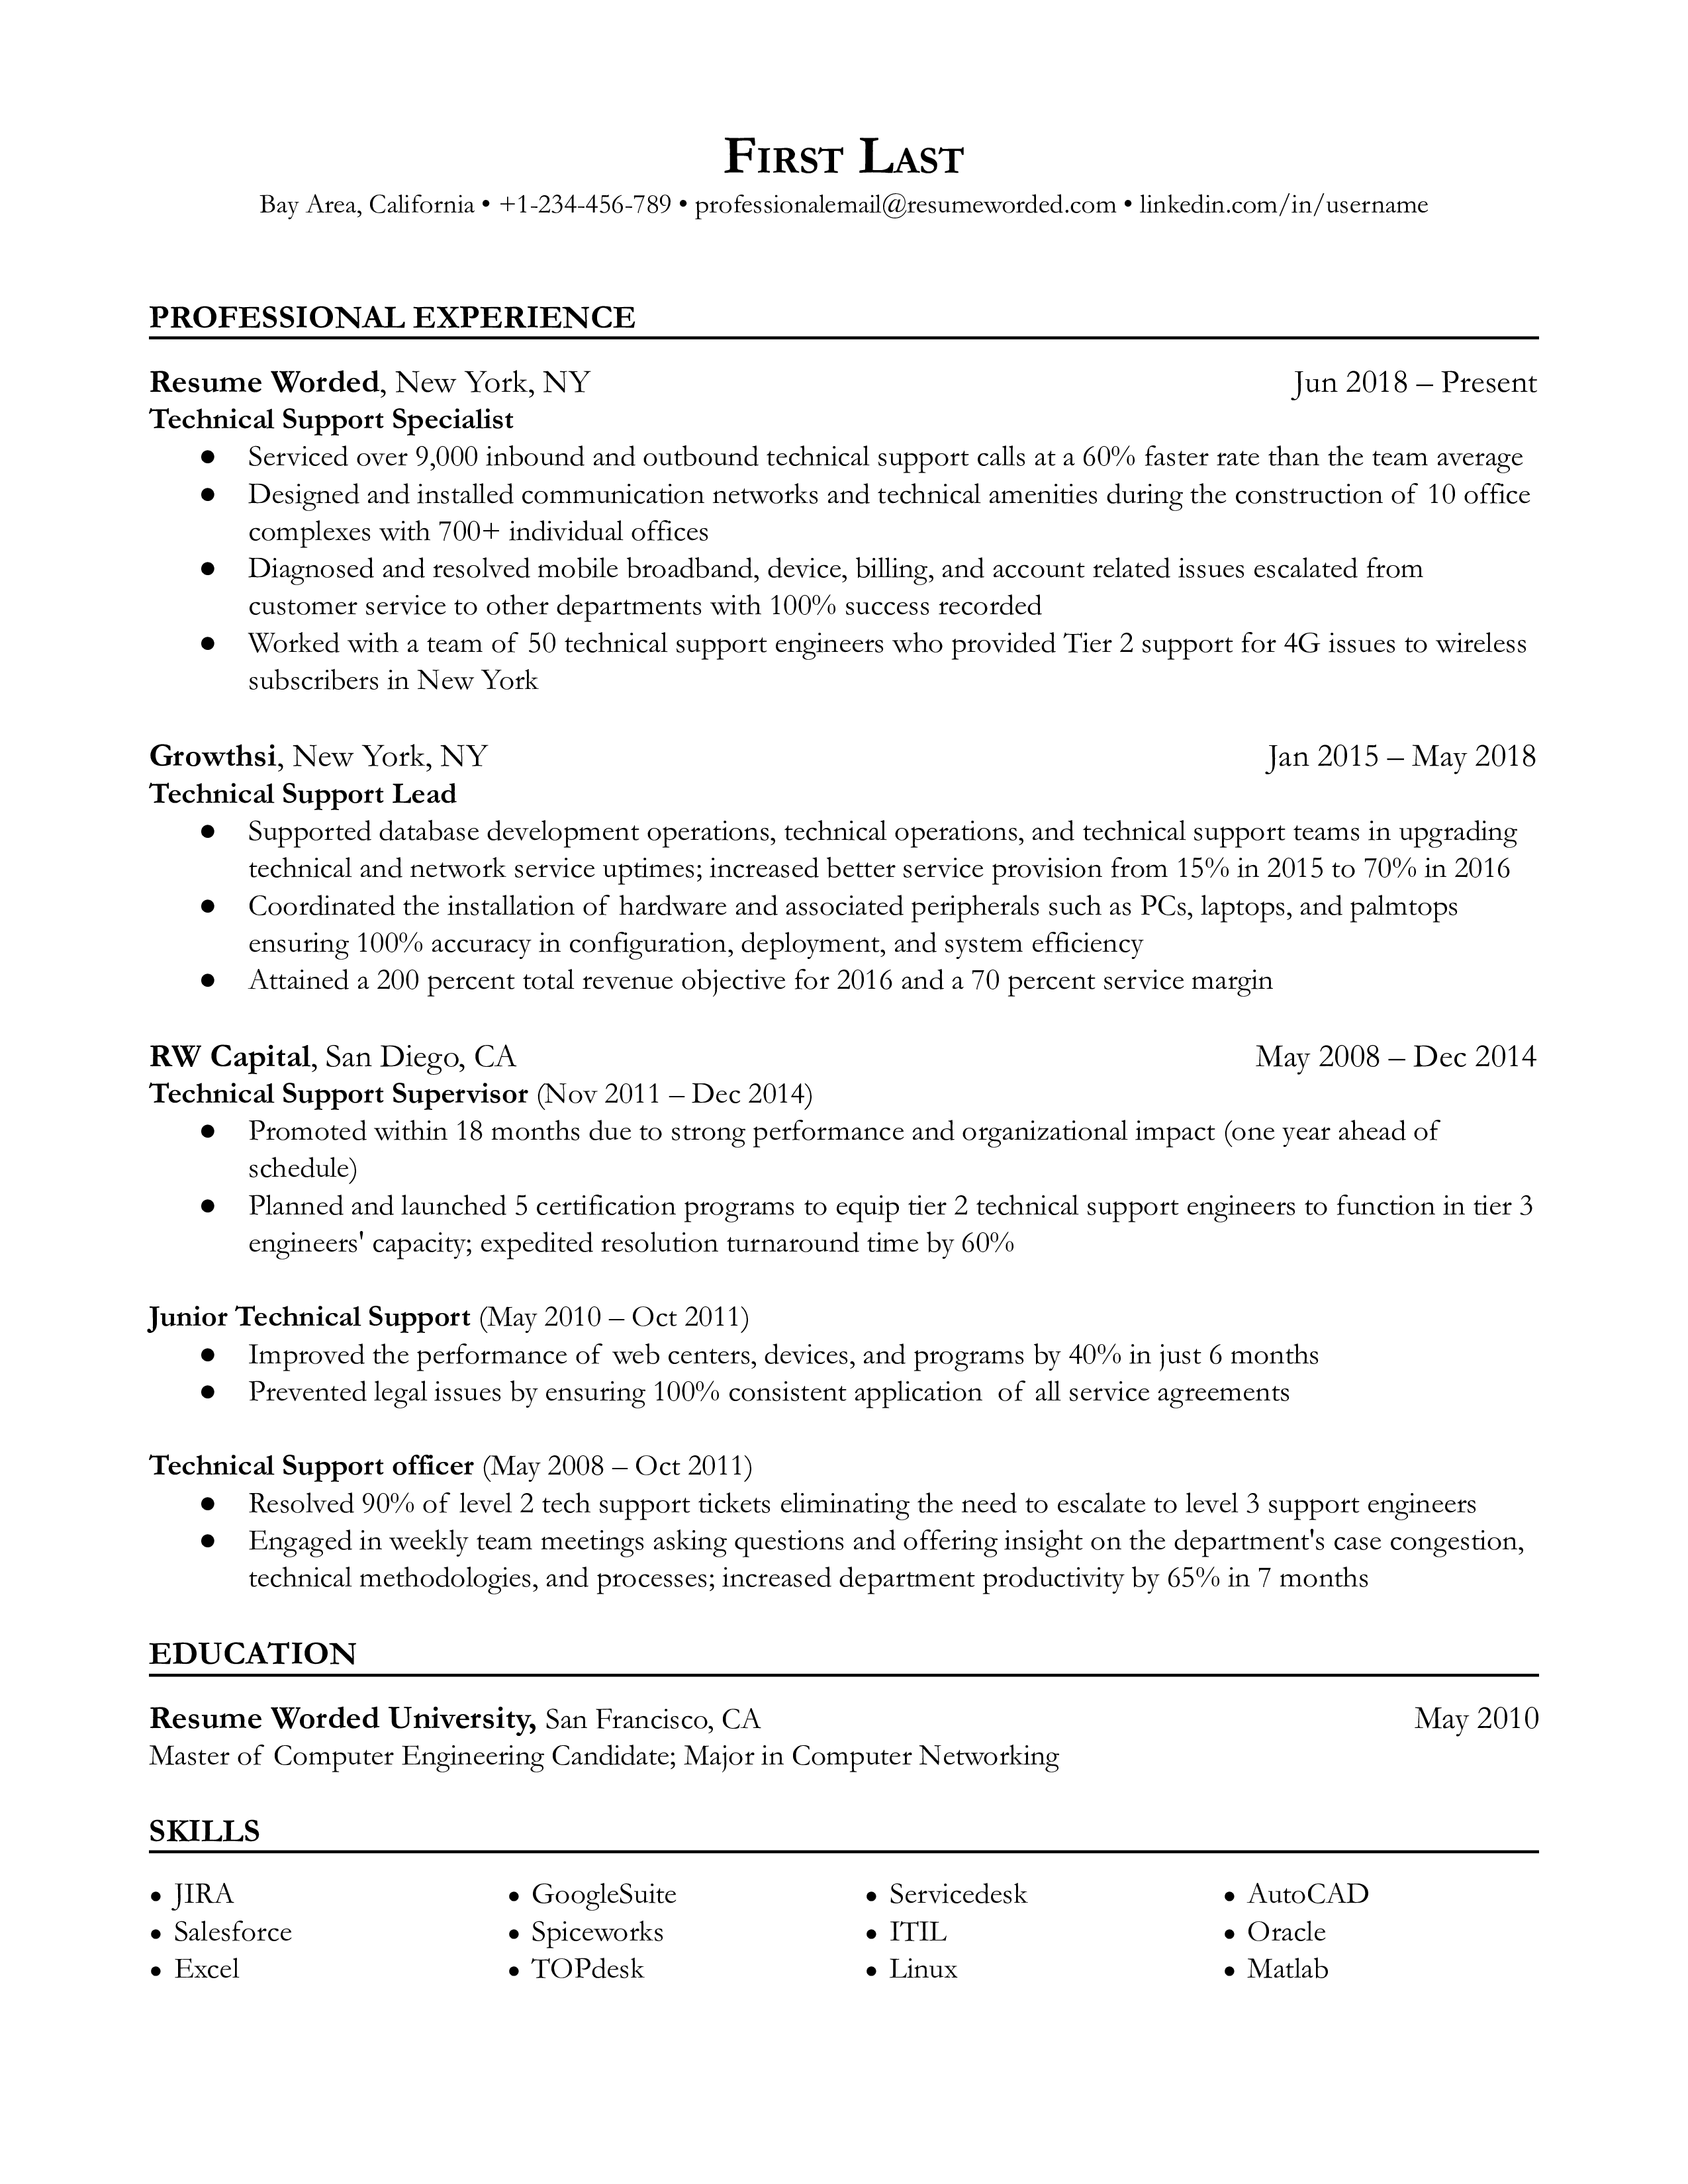 This technical support specialist resume shows all elements required to make a great resume that gets you your dream job.